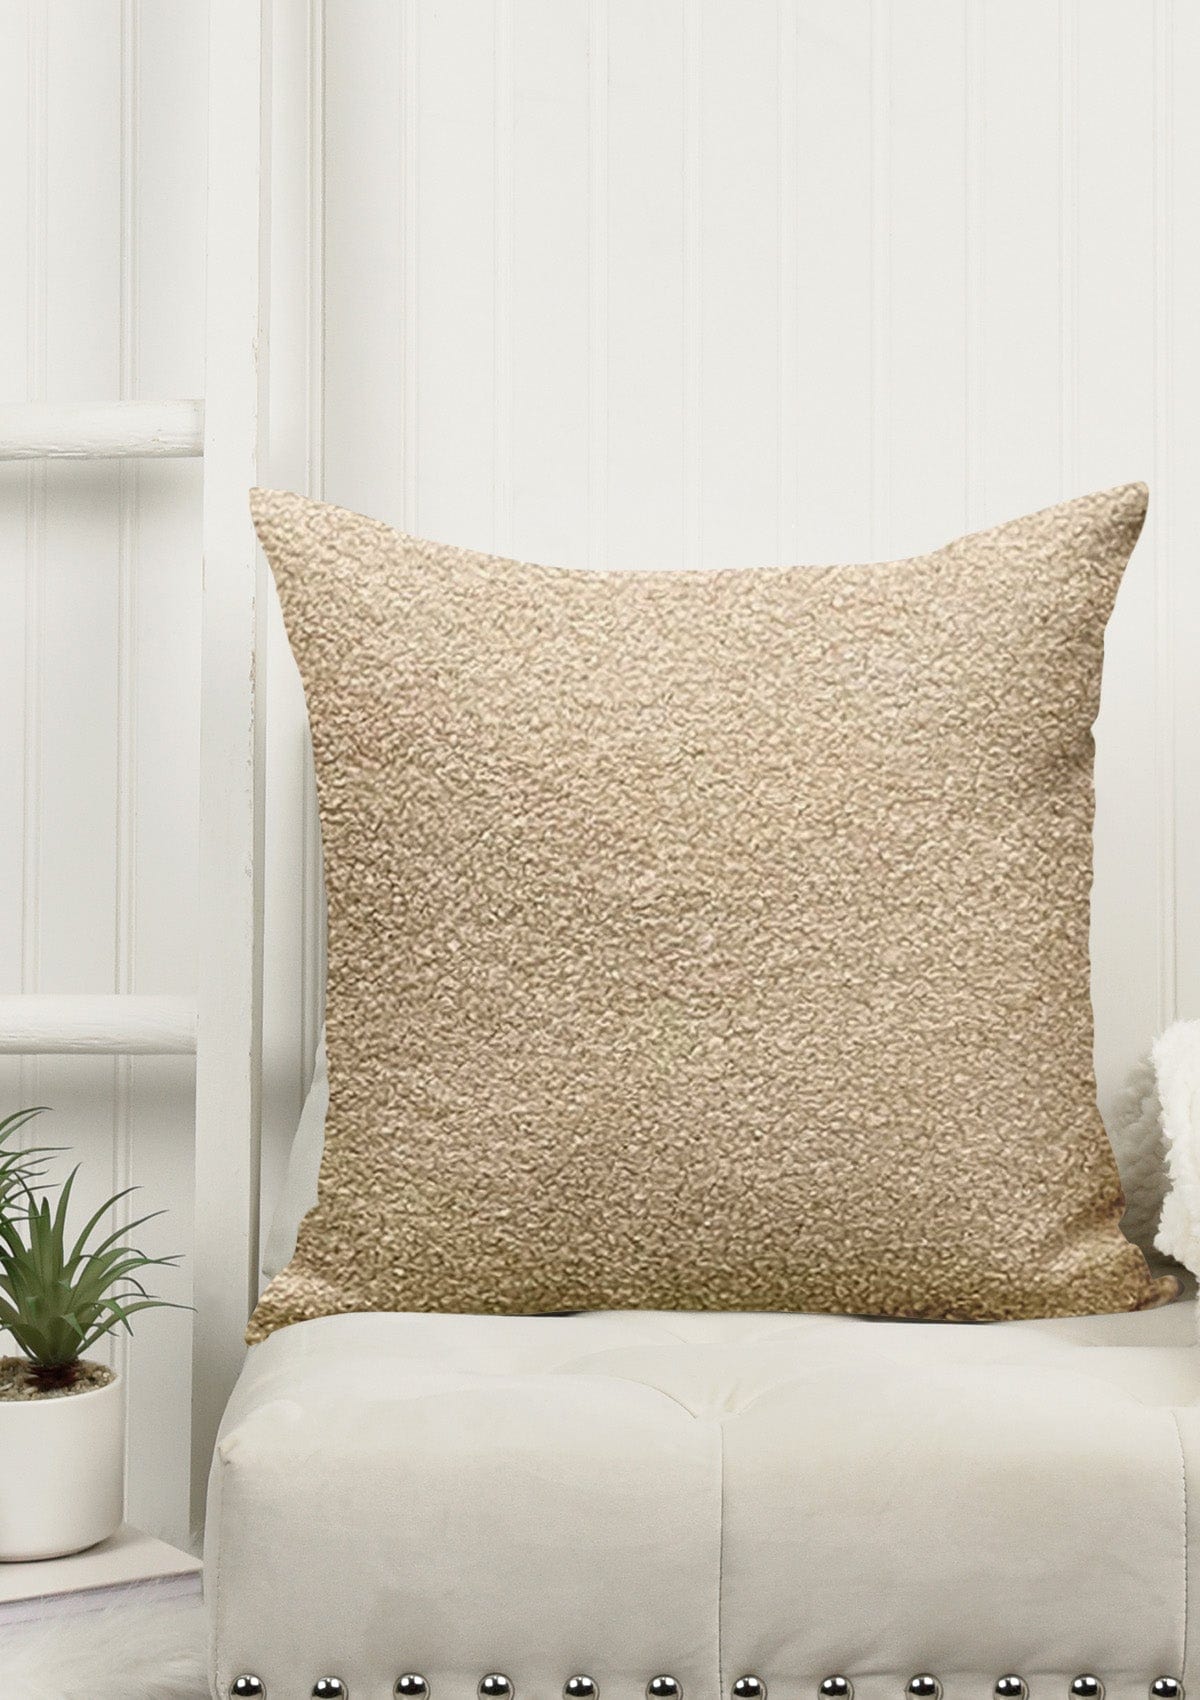 Cream Faux Fur Cushion Covers 30x50cm / Beige / No thanks - cover only